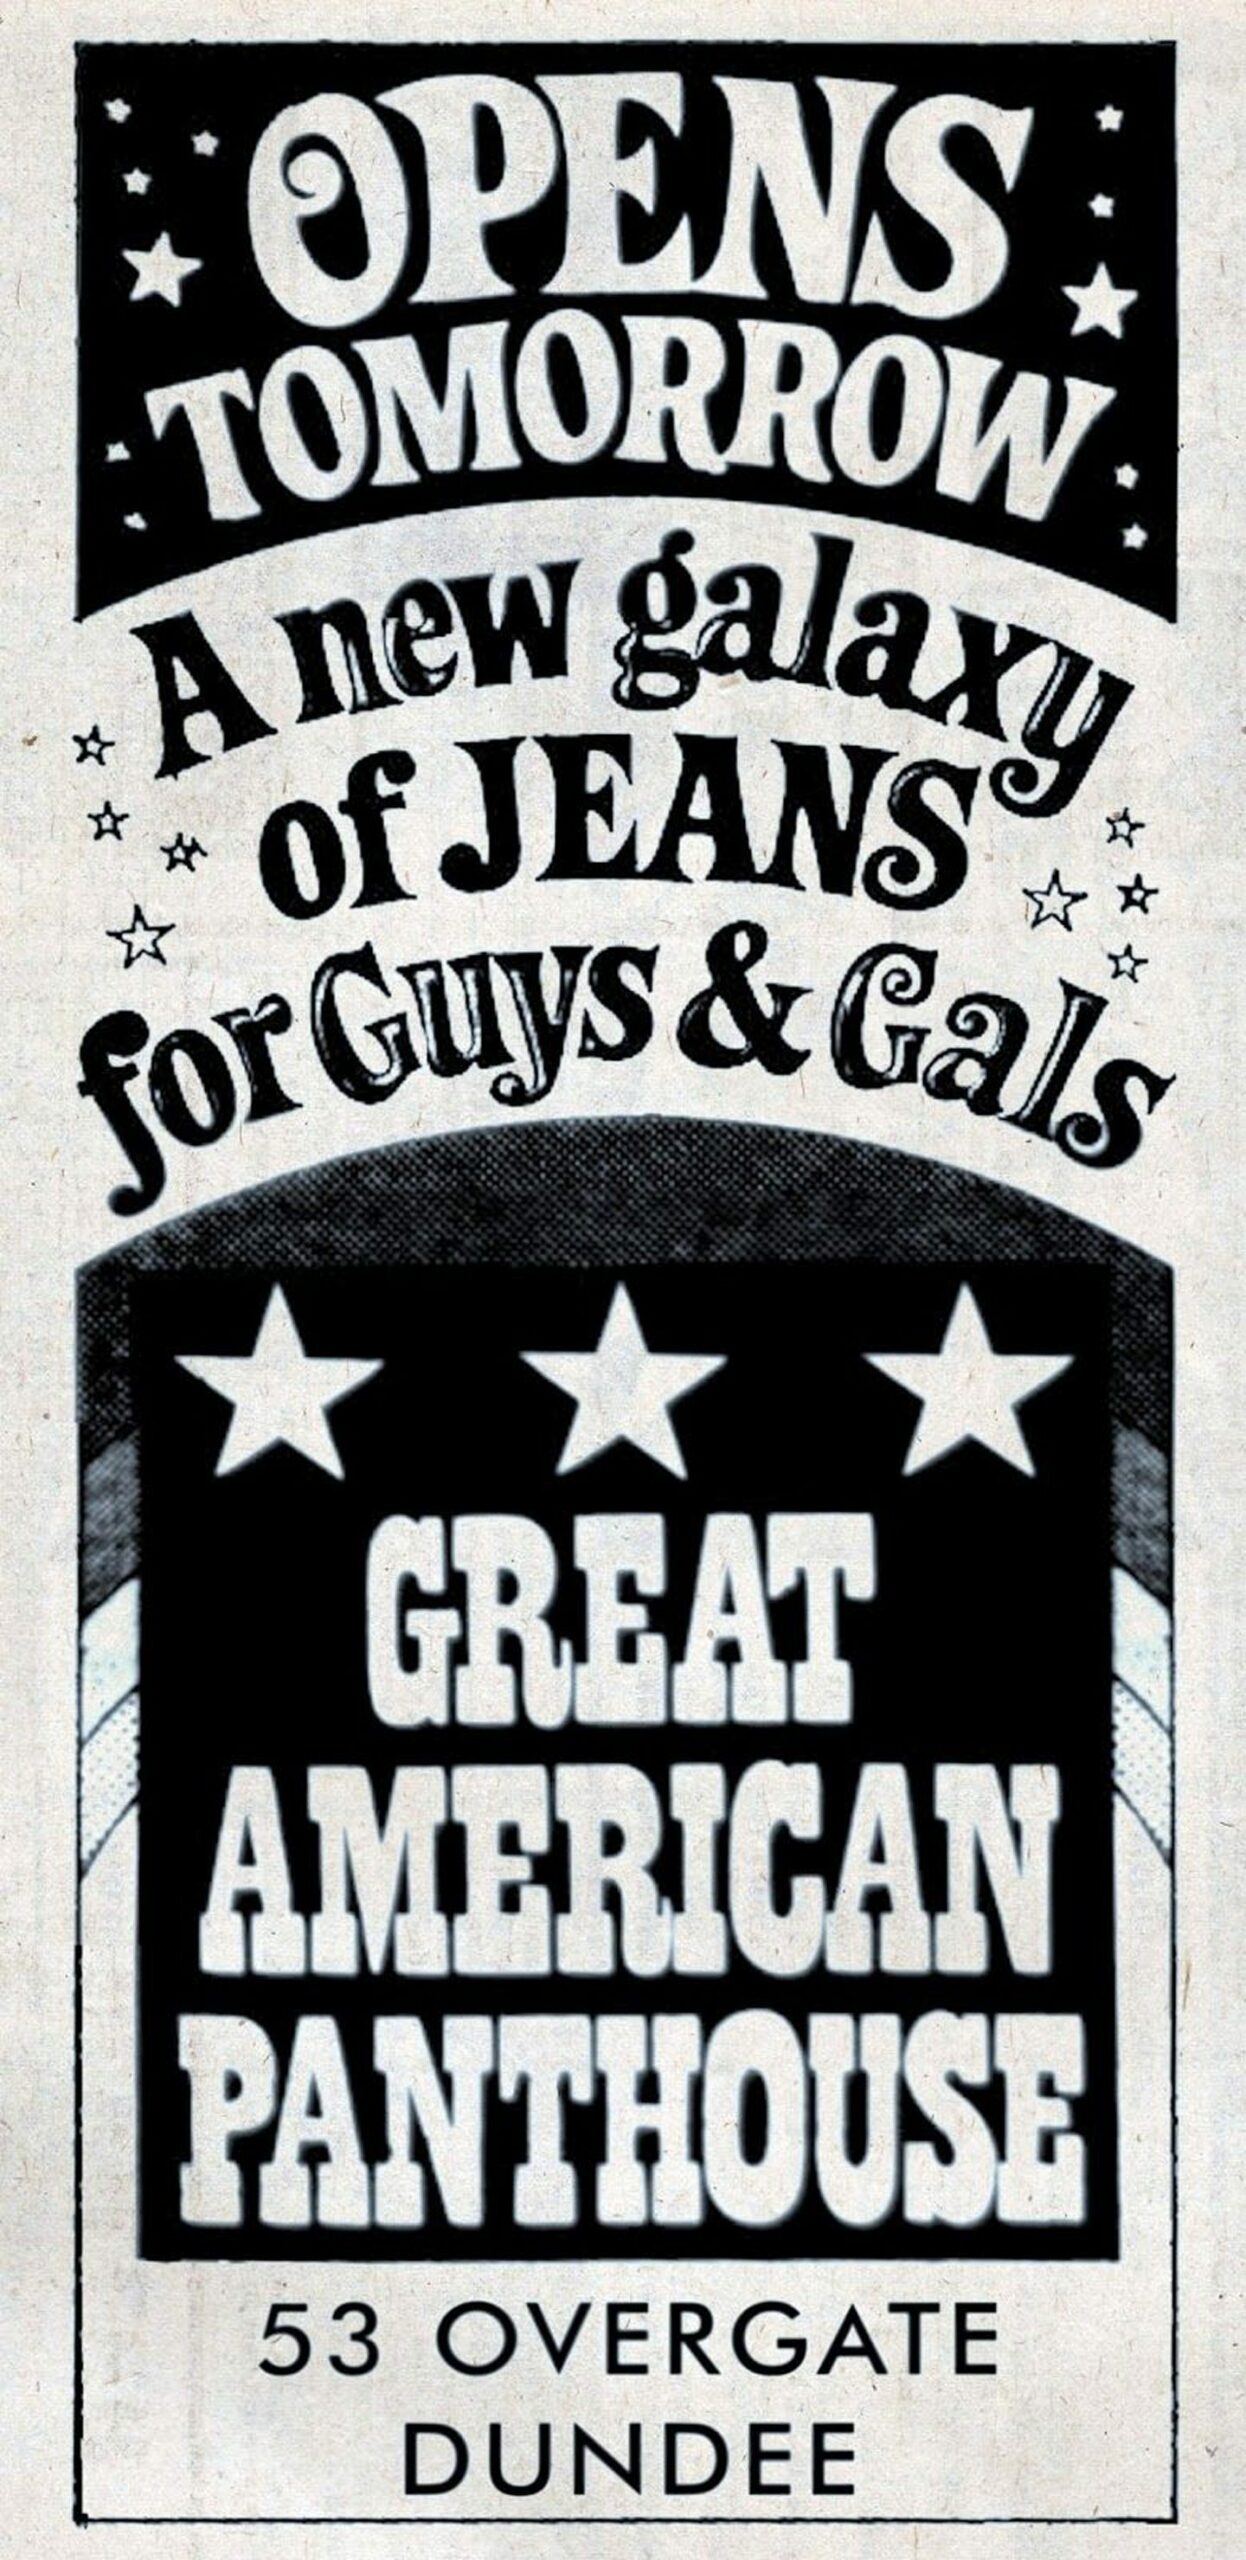 A poster for The Great American Panthouse, which was hugely popular in the Overgate in the 1970s. Image: Retro Dundee.